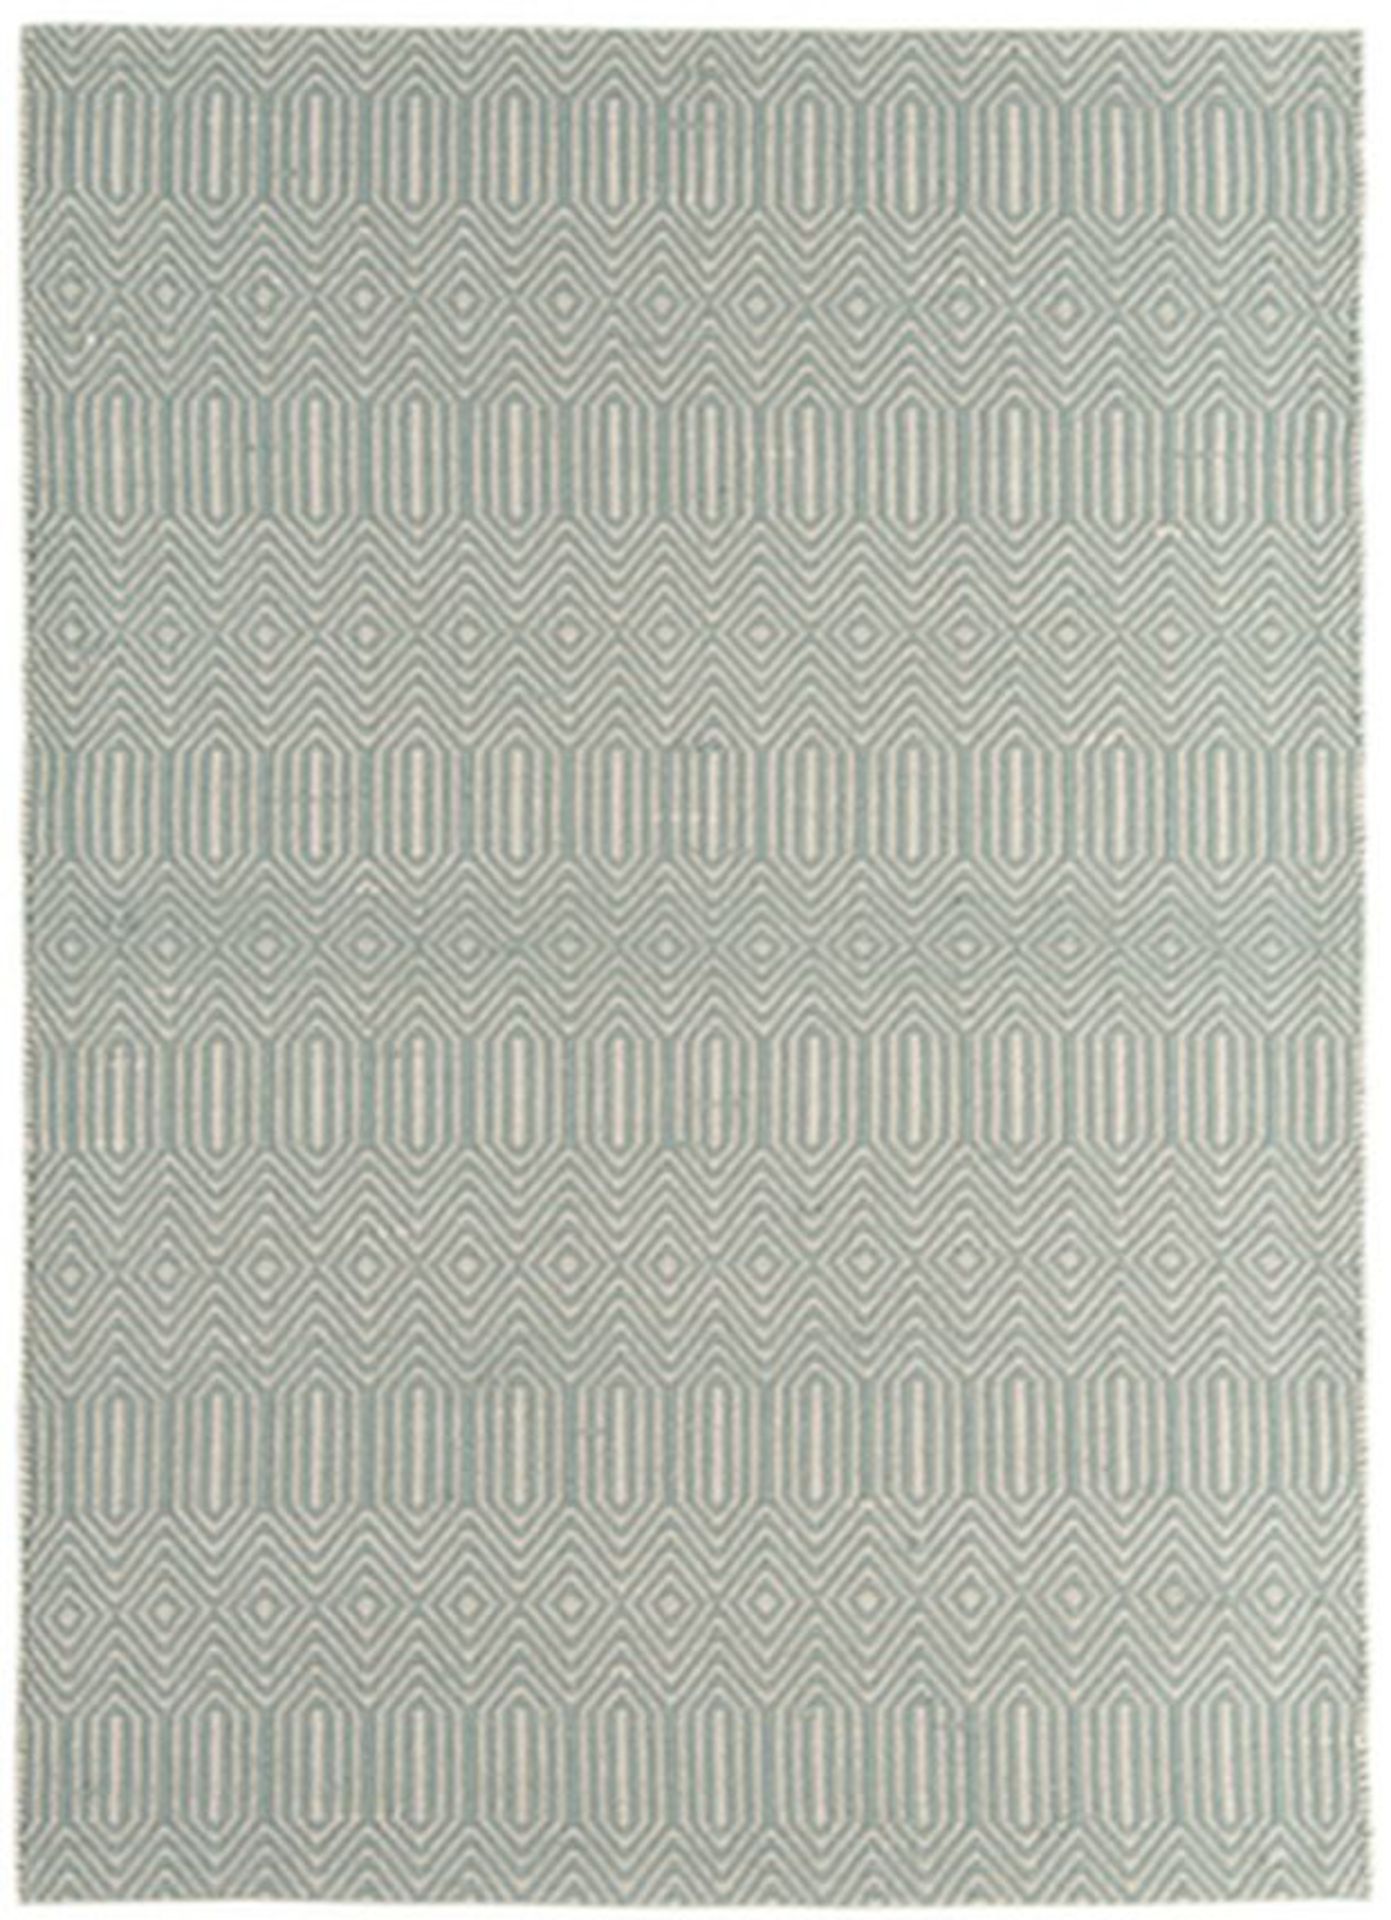 1 x Asiatic Sloan Wool Rich Runner Rug - Colour: Duck Egg - Dimensions: 60 x 200cm - New Sealed - Image 5 of 5